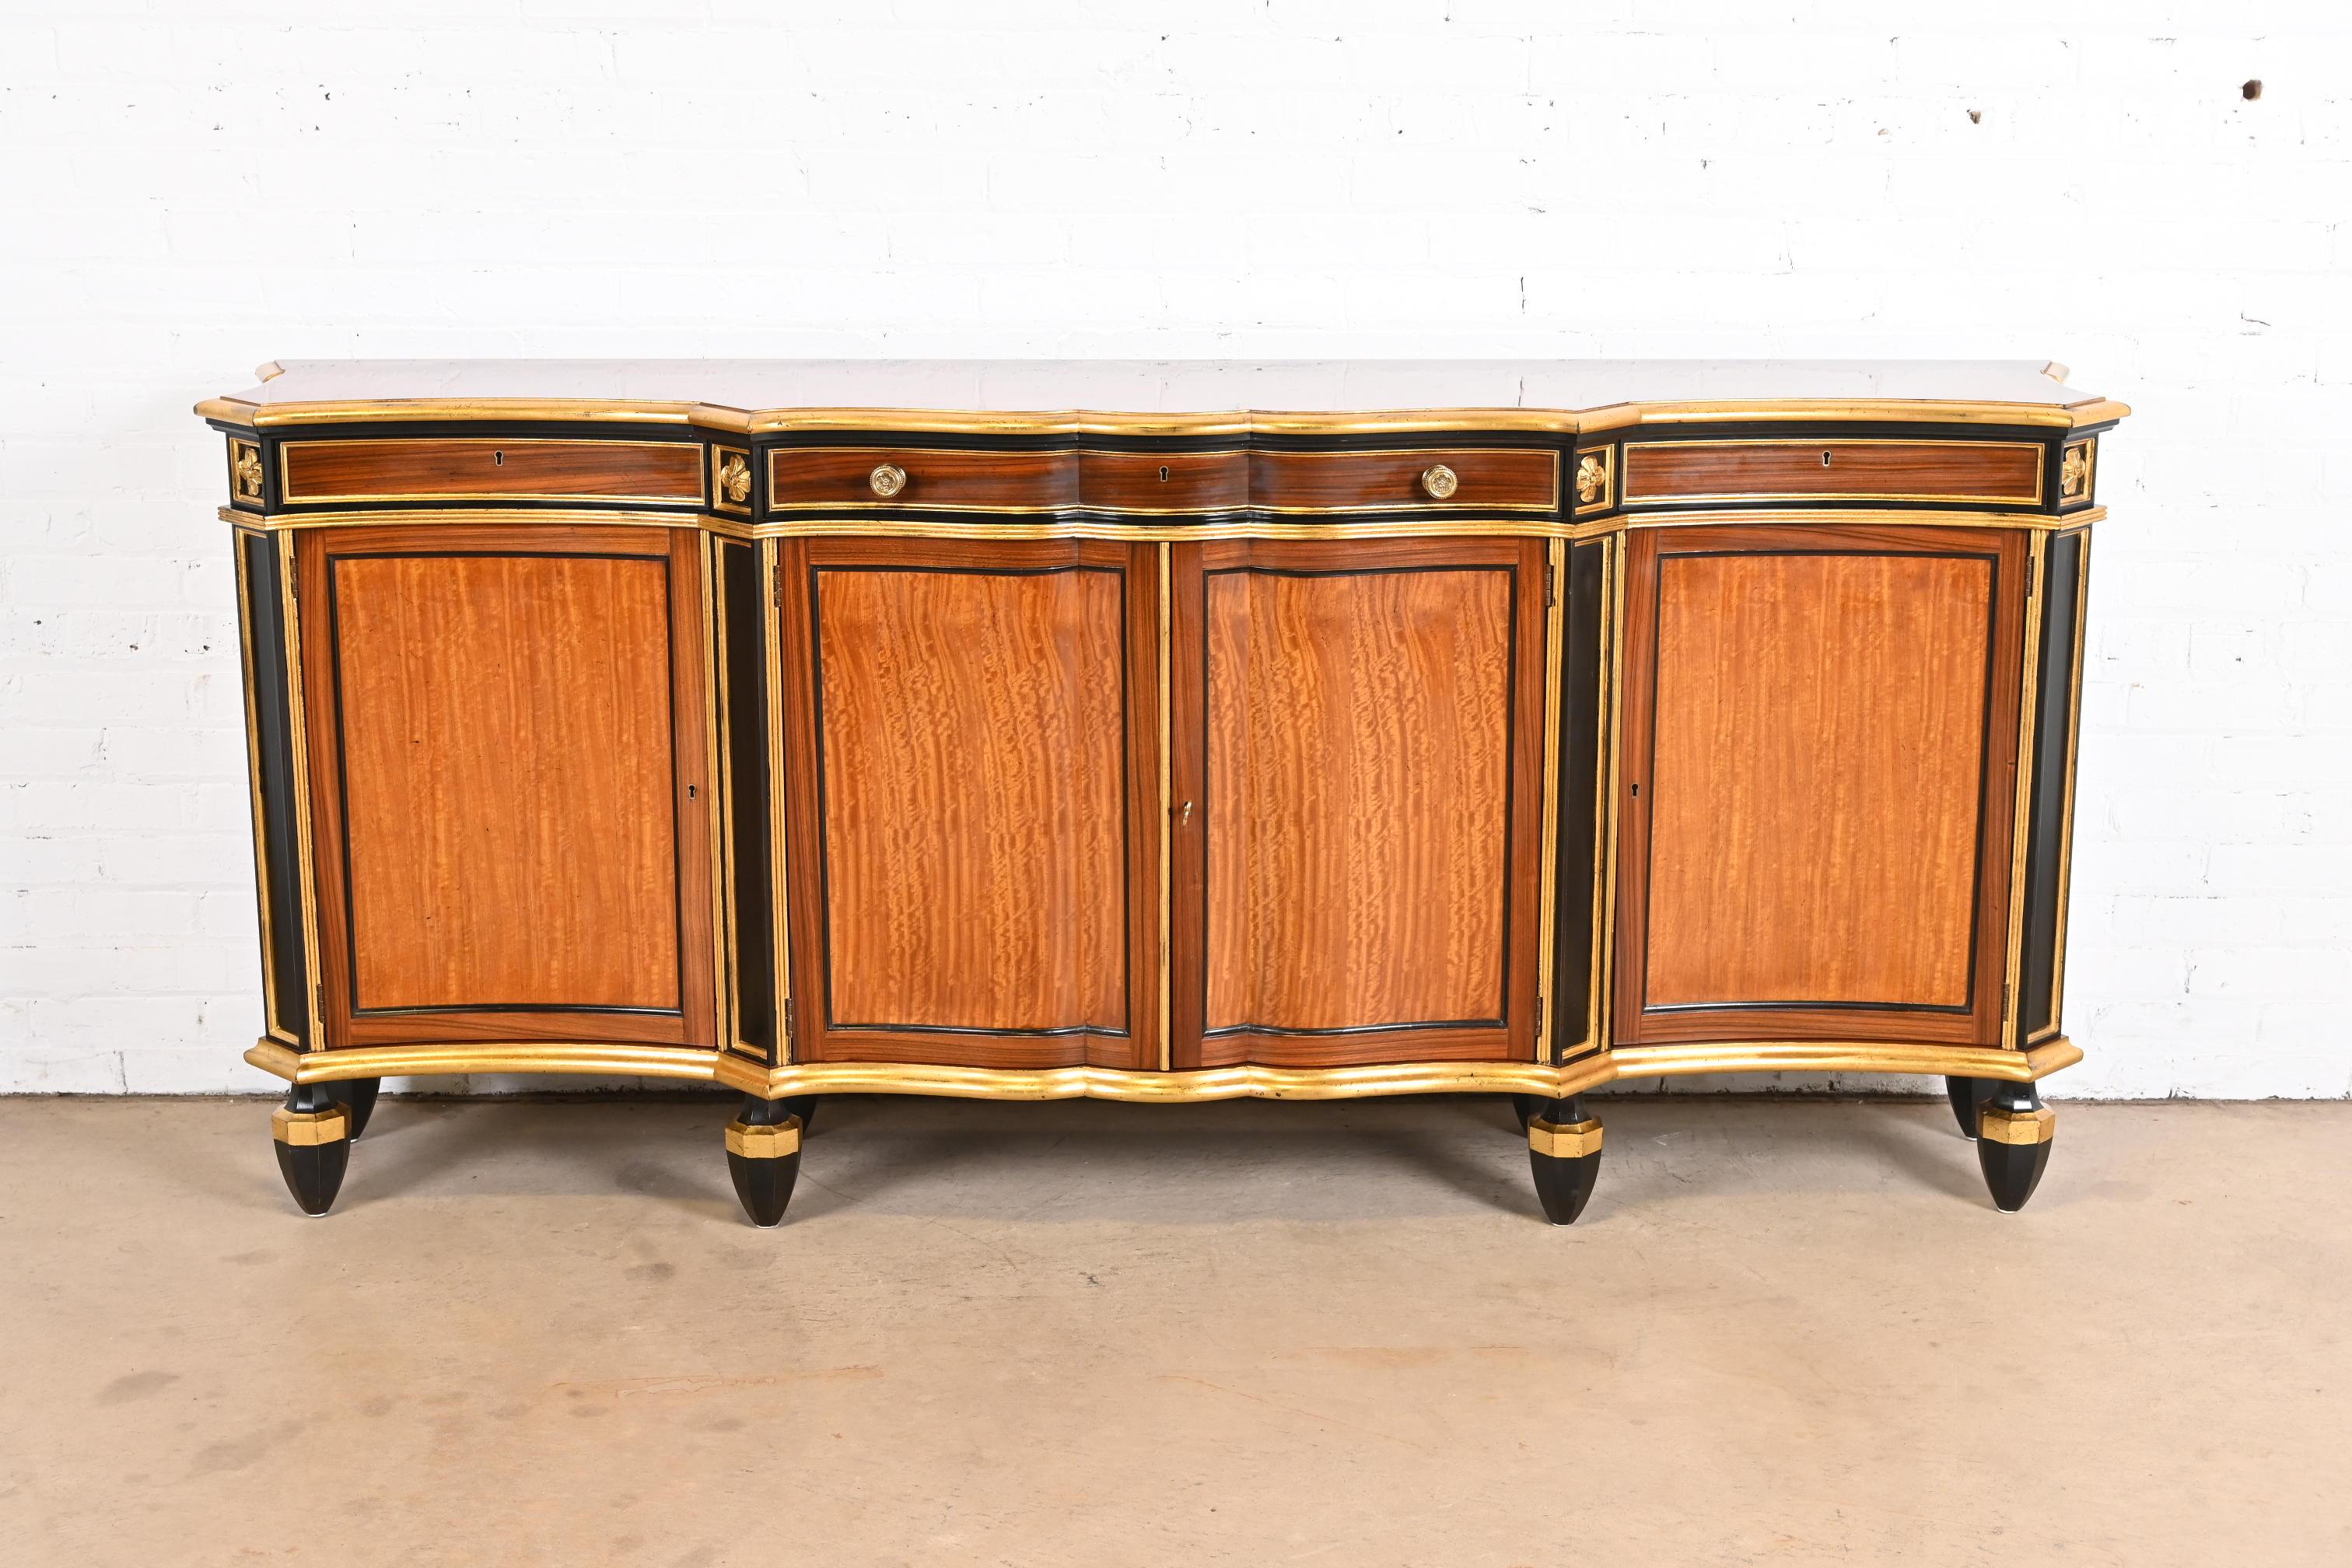 A rare and exceptional Regency or Neoclassical style serpentine satinwood sideboard, credenza, or bar cabinet

From the exclusive 